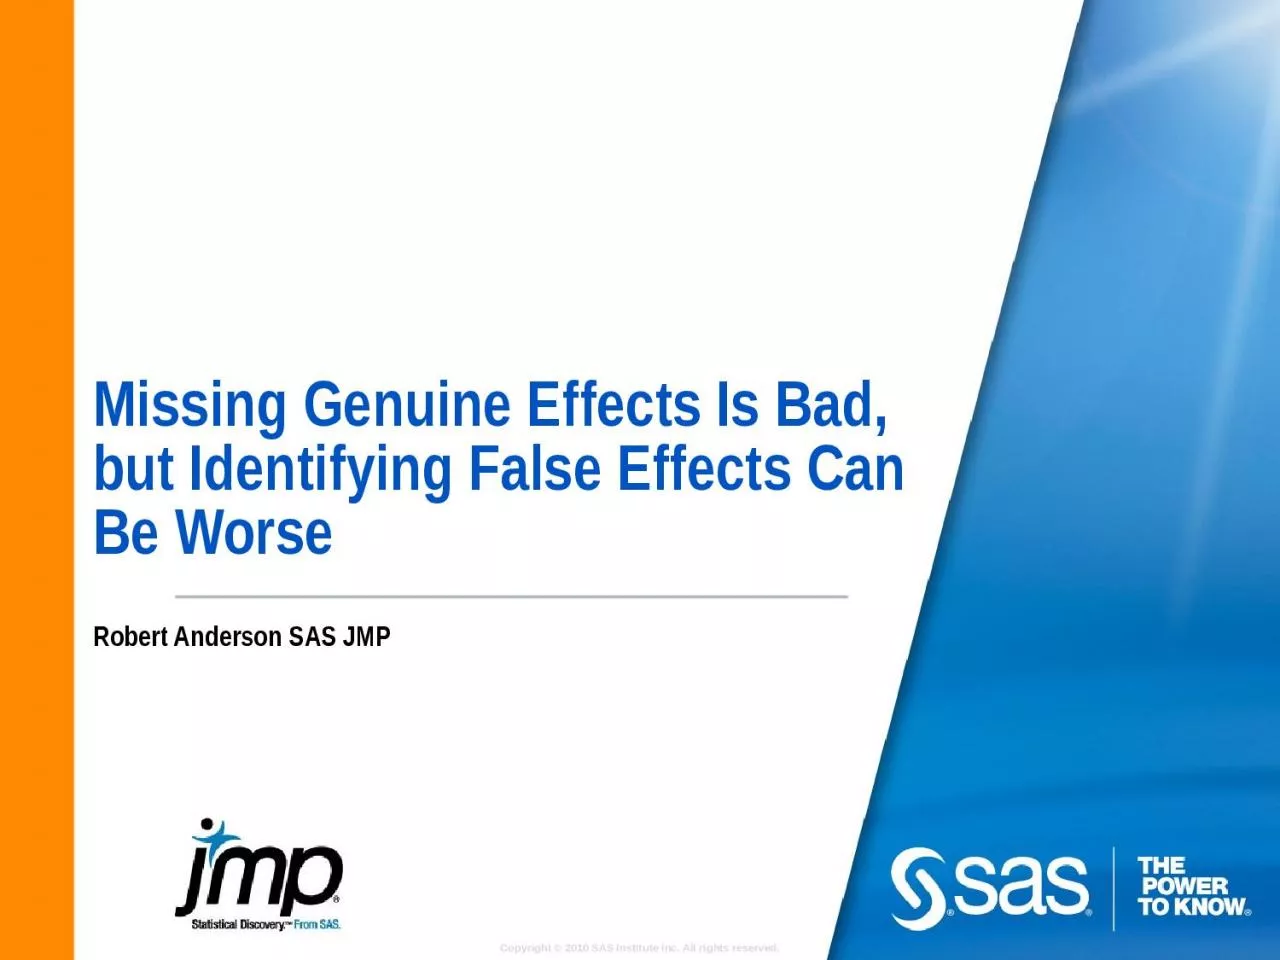 Missing Genuine Effects Is Bad, but Identifying False Effects Can Be Worse